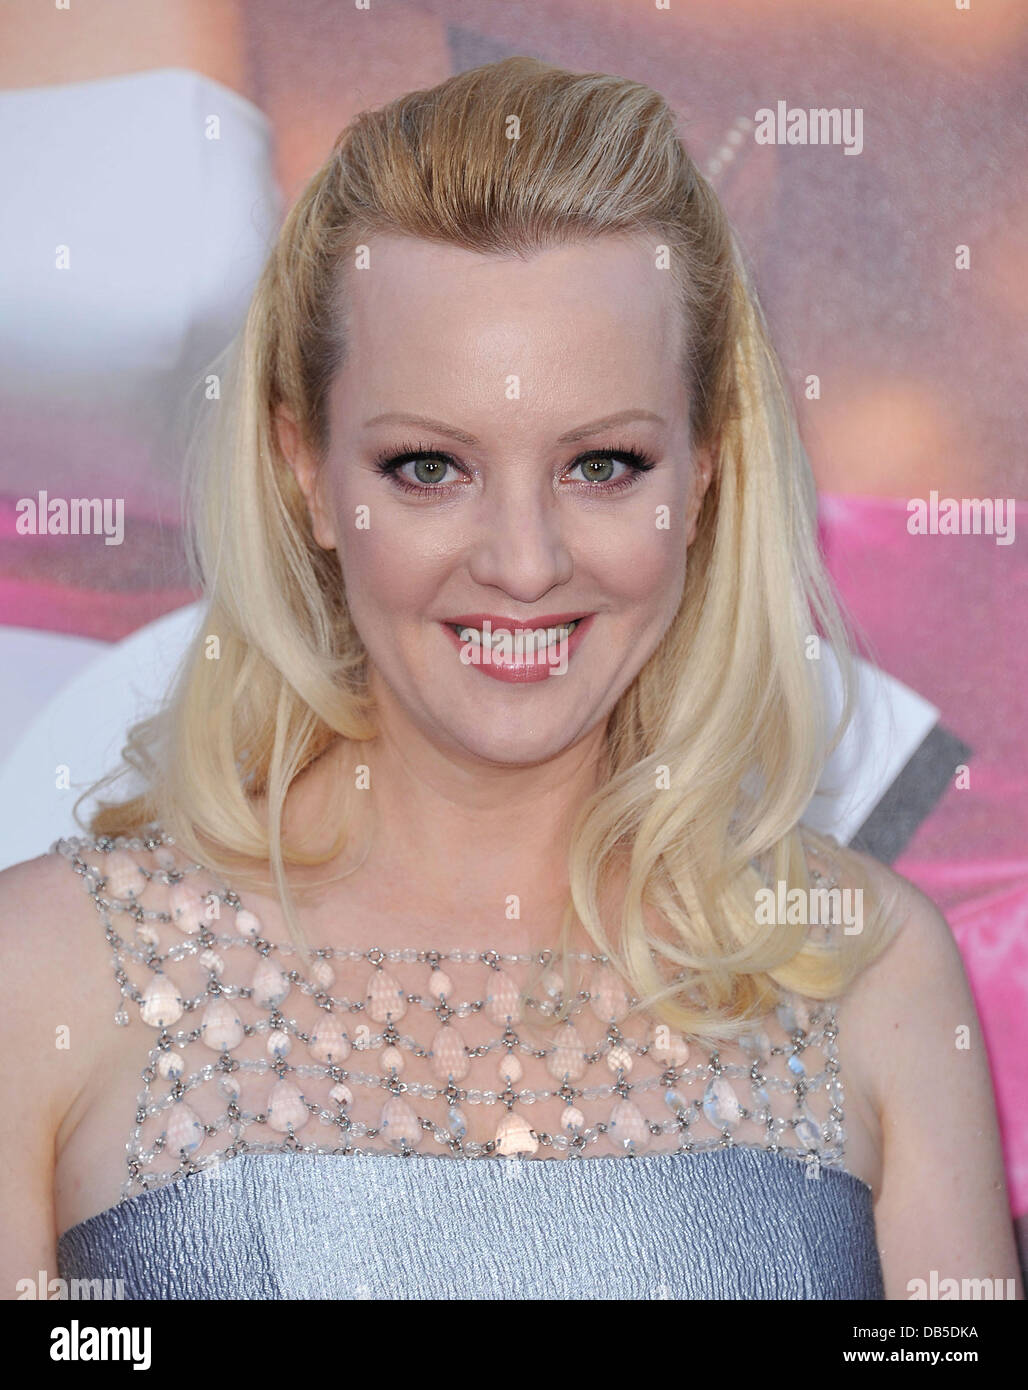 Wendi McLendon-Covey The Premiere of 'Bridesmaids' held at Mann Village Theatre - Arrivals Los Angeles, California - 28.04.11 Stock Photo